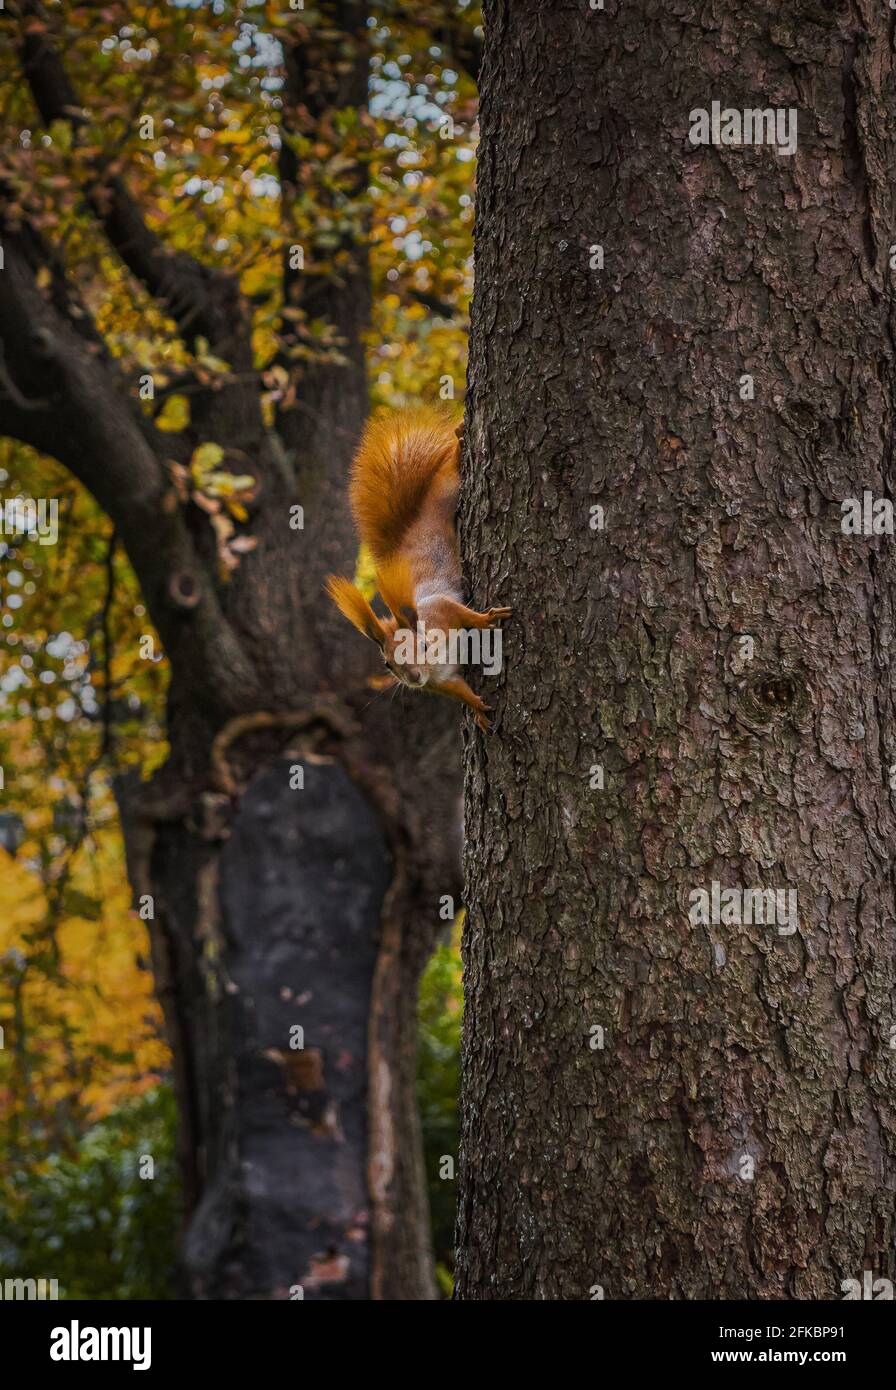 Cute curious red tree squirrel looking out from behind of fir tree trunk. Wild rodent in its natural habitat. Autumn season. Park at background. Selec Stock Photo